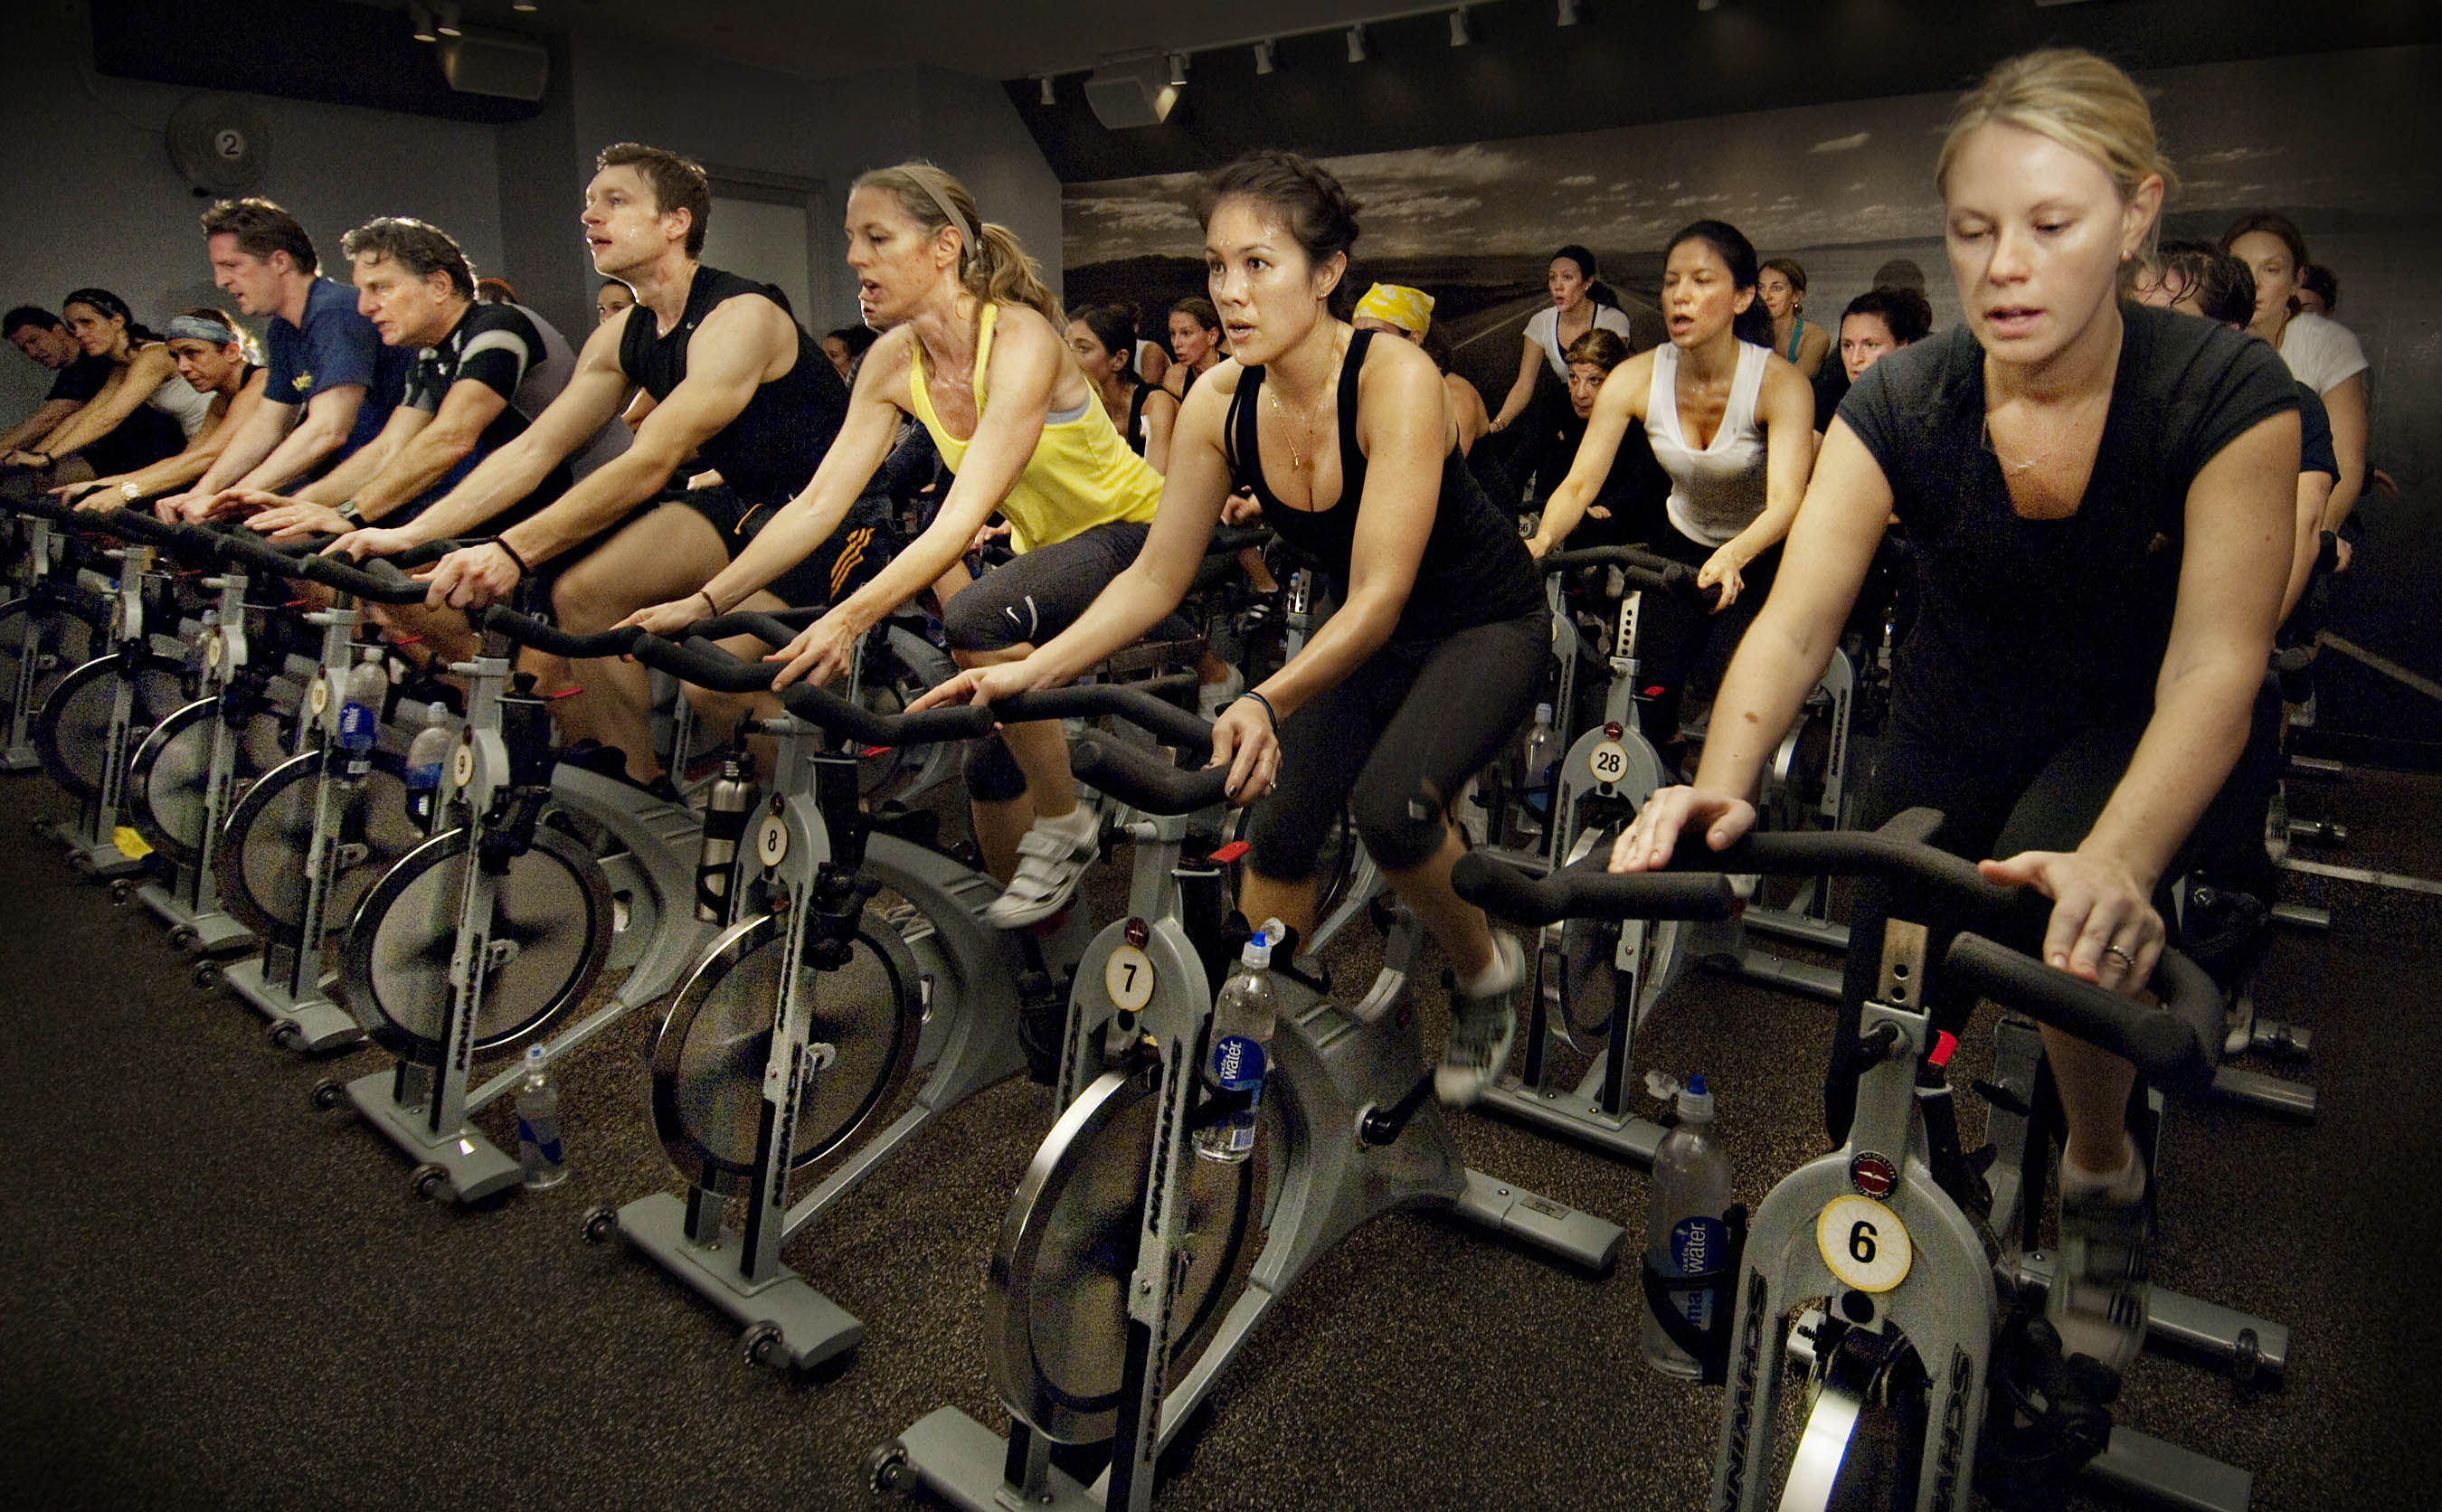 SoulCycle Instructor Raises More Than $16,000 for Laid-Off Co-Workers